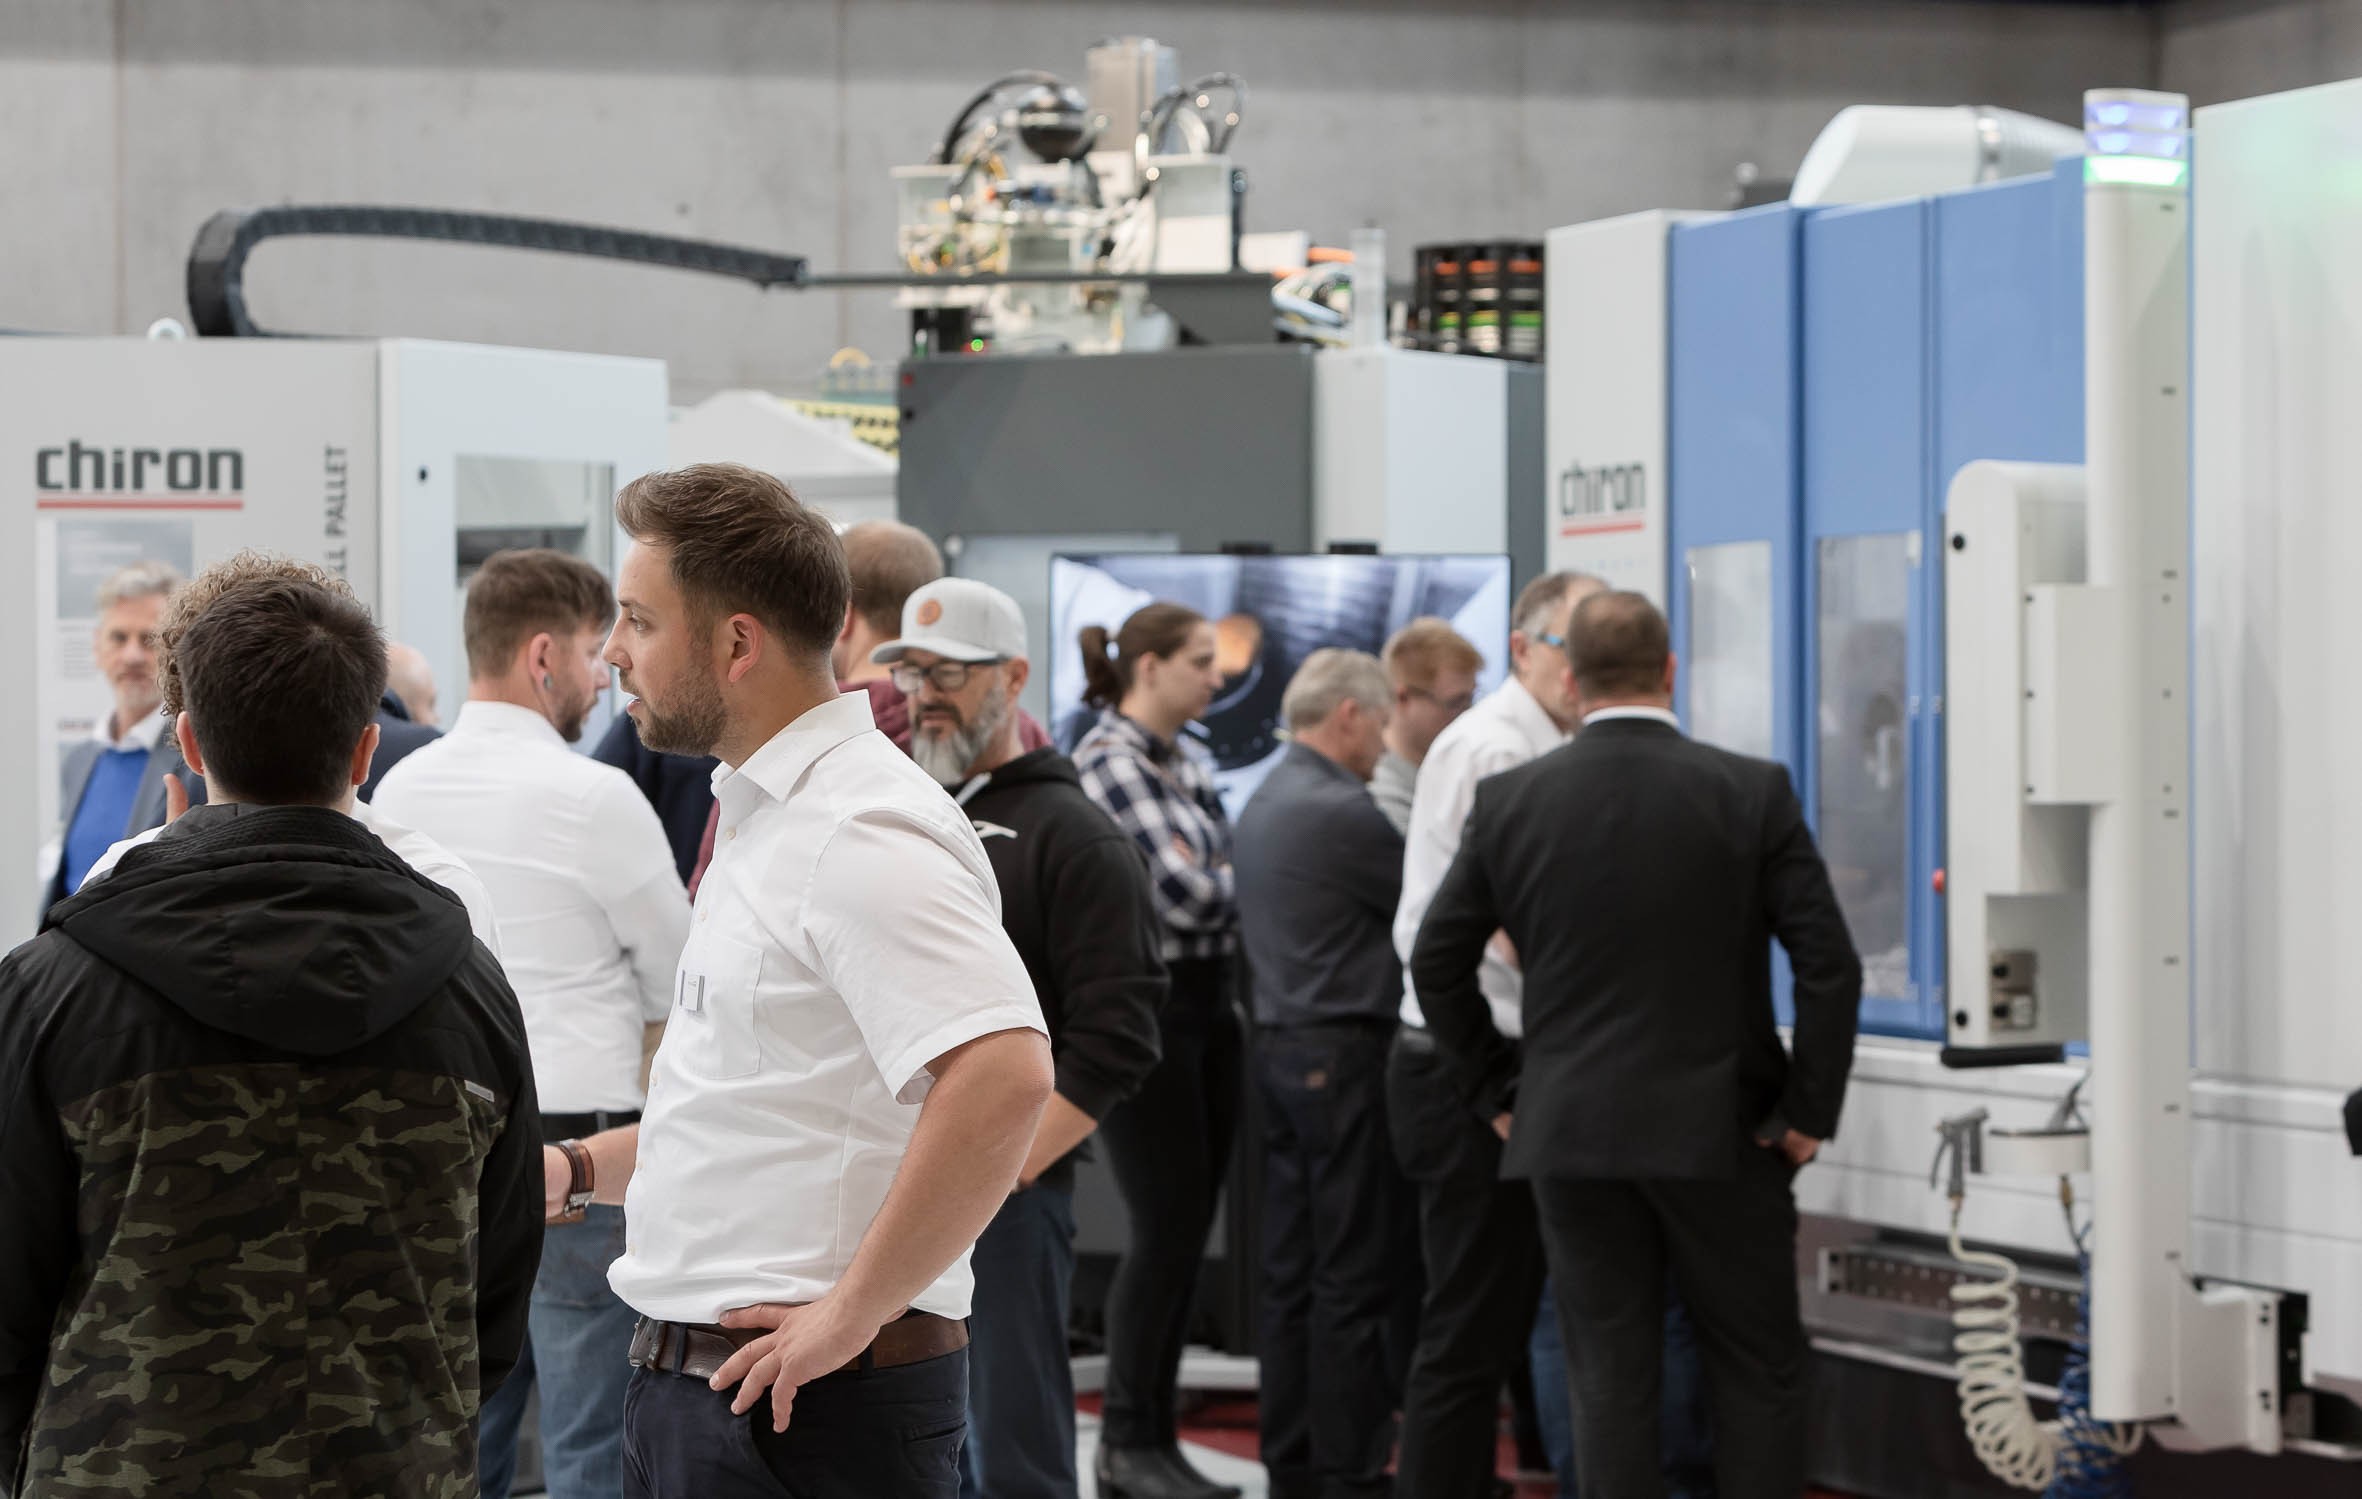 Visitors can finally see numerous machining innovations in action and get valuable information on products and solutions for automated, future-proof and sustainable production.